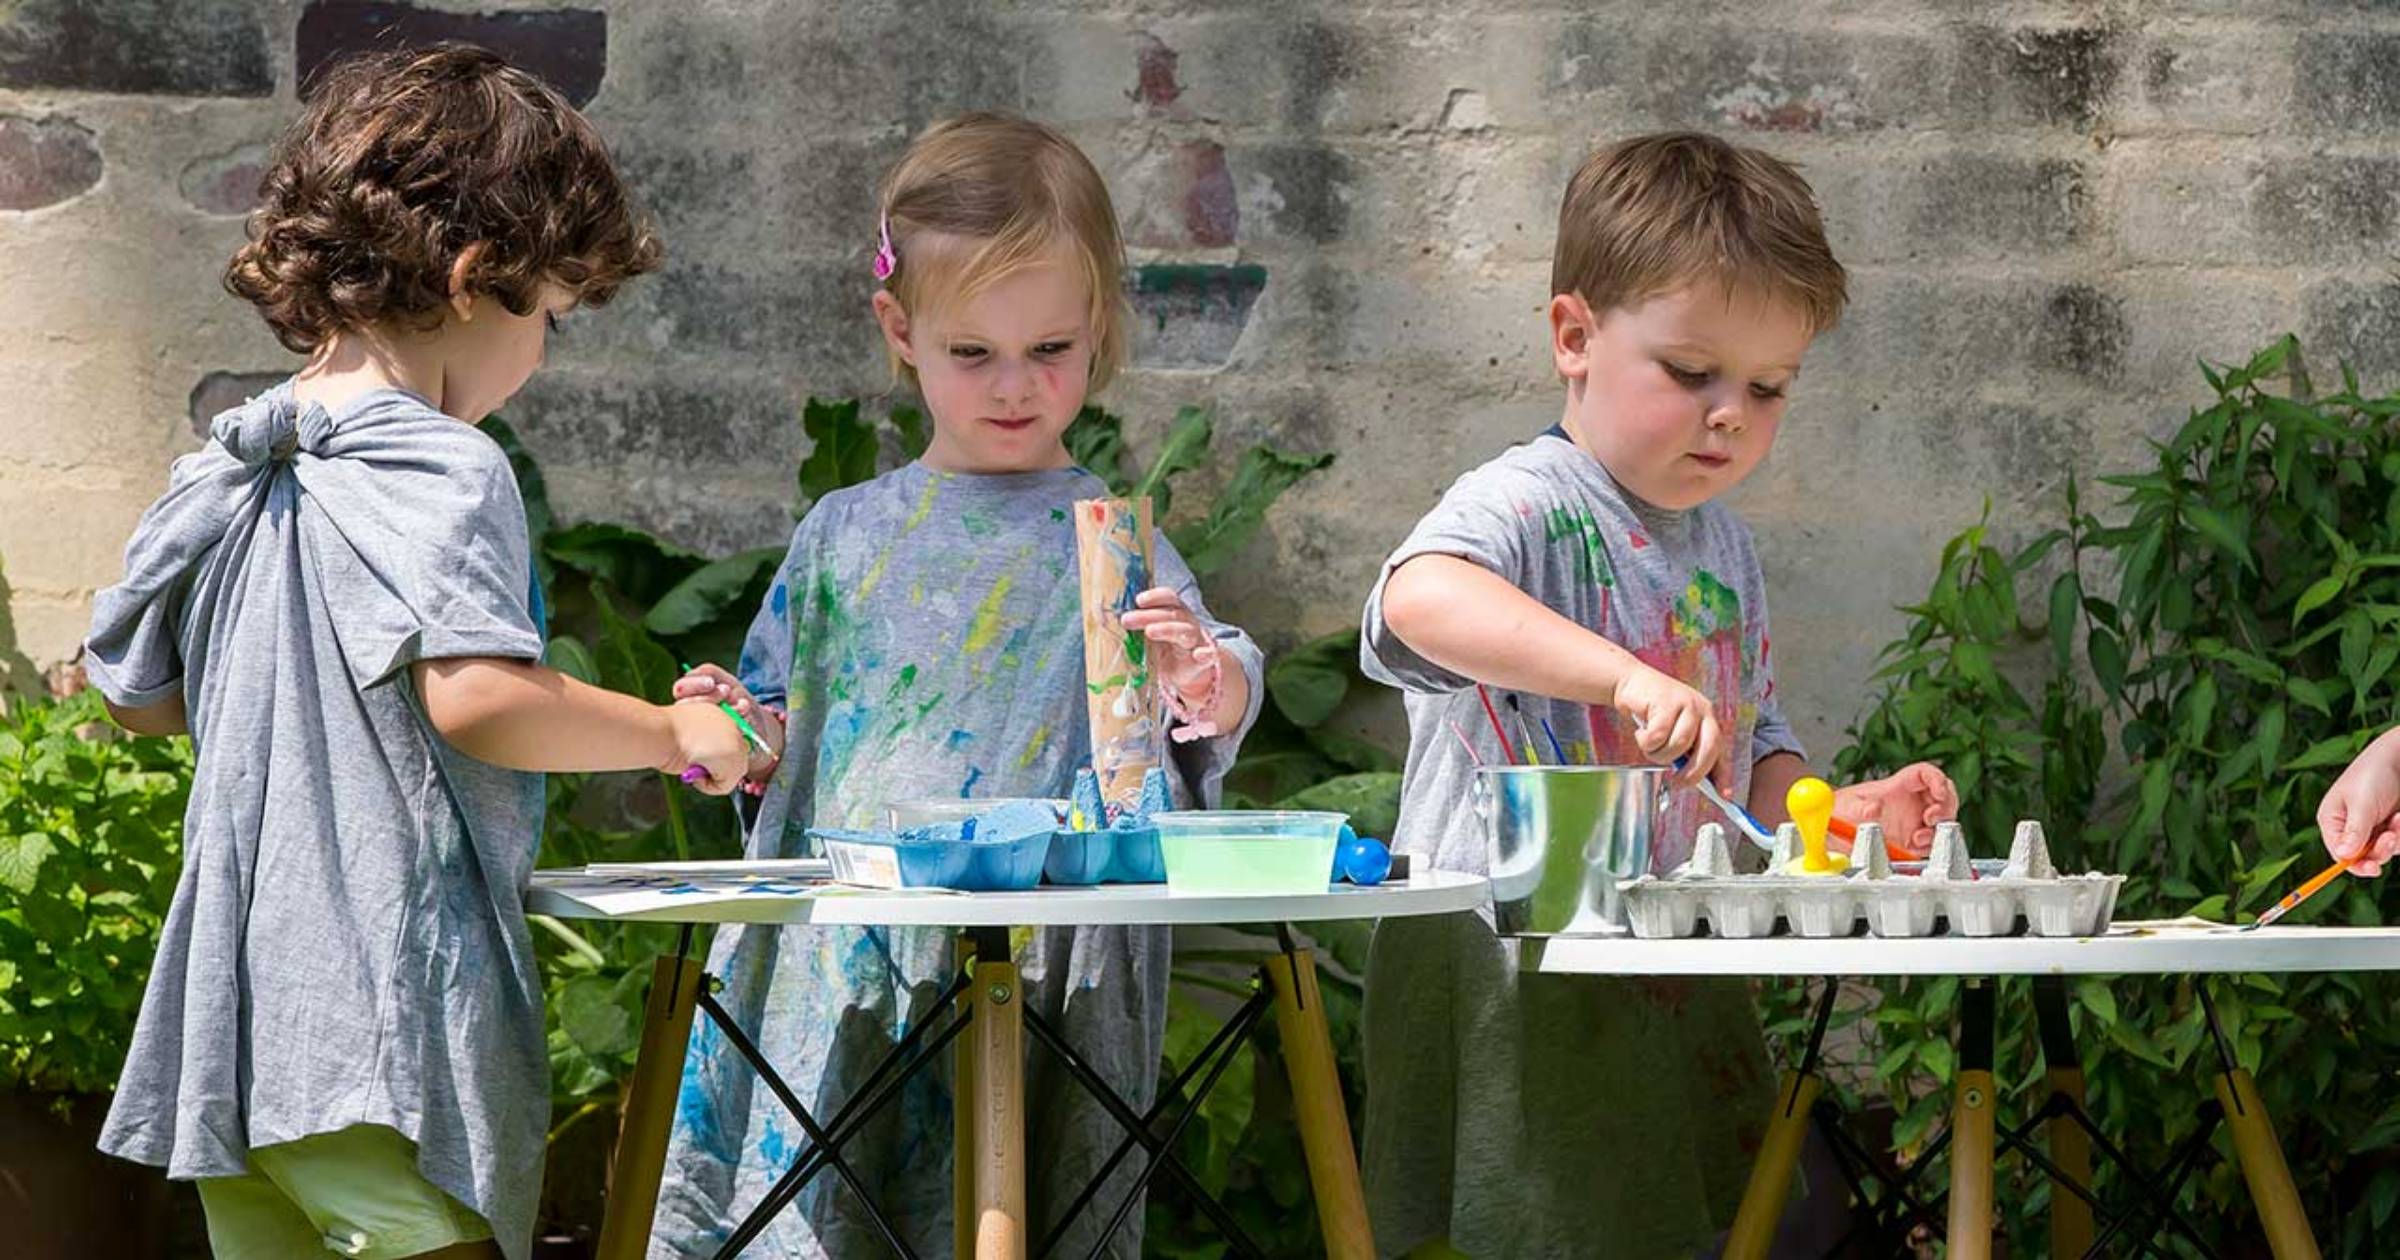 3 Children Painting Outdoors